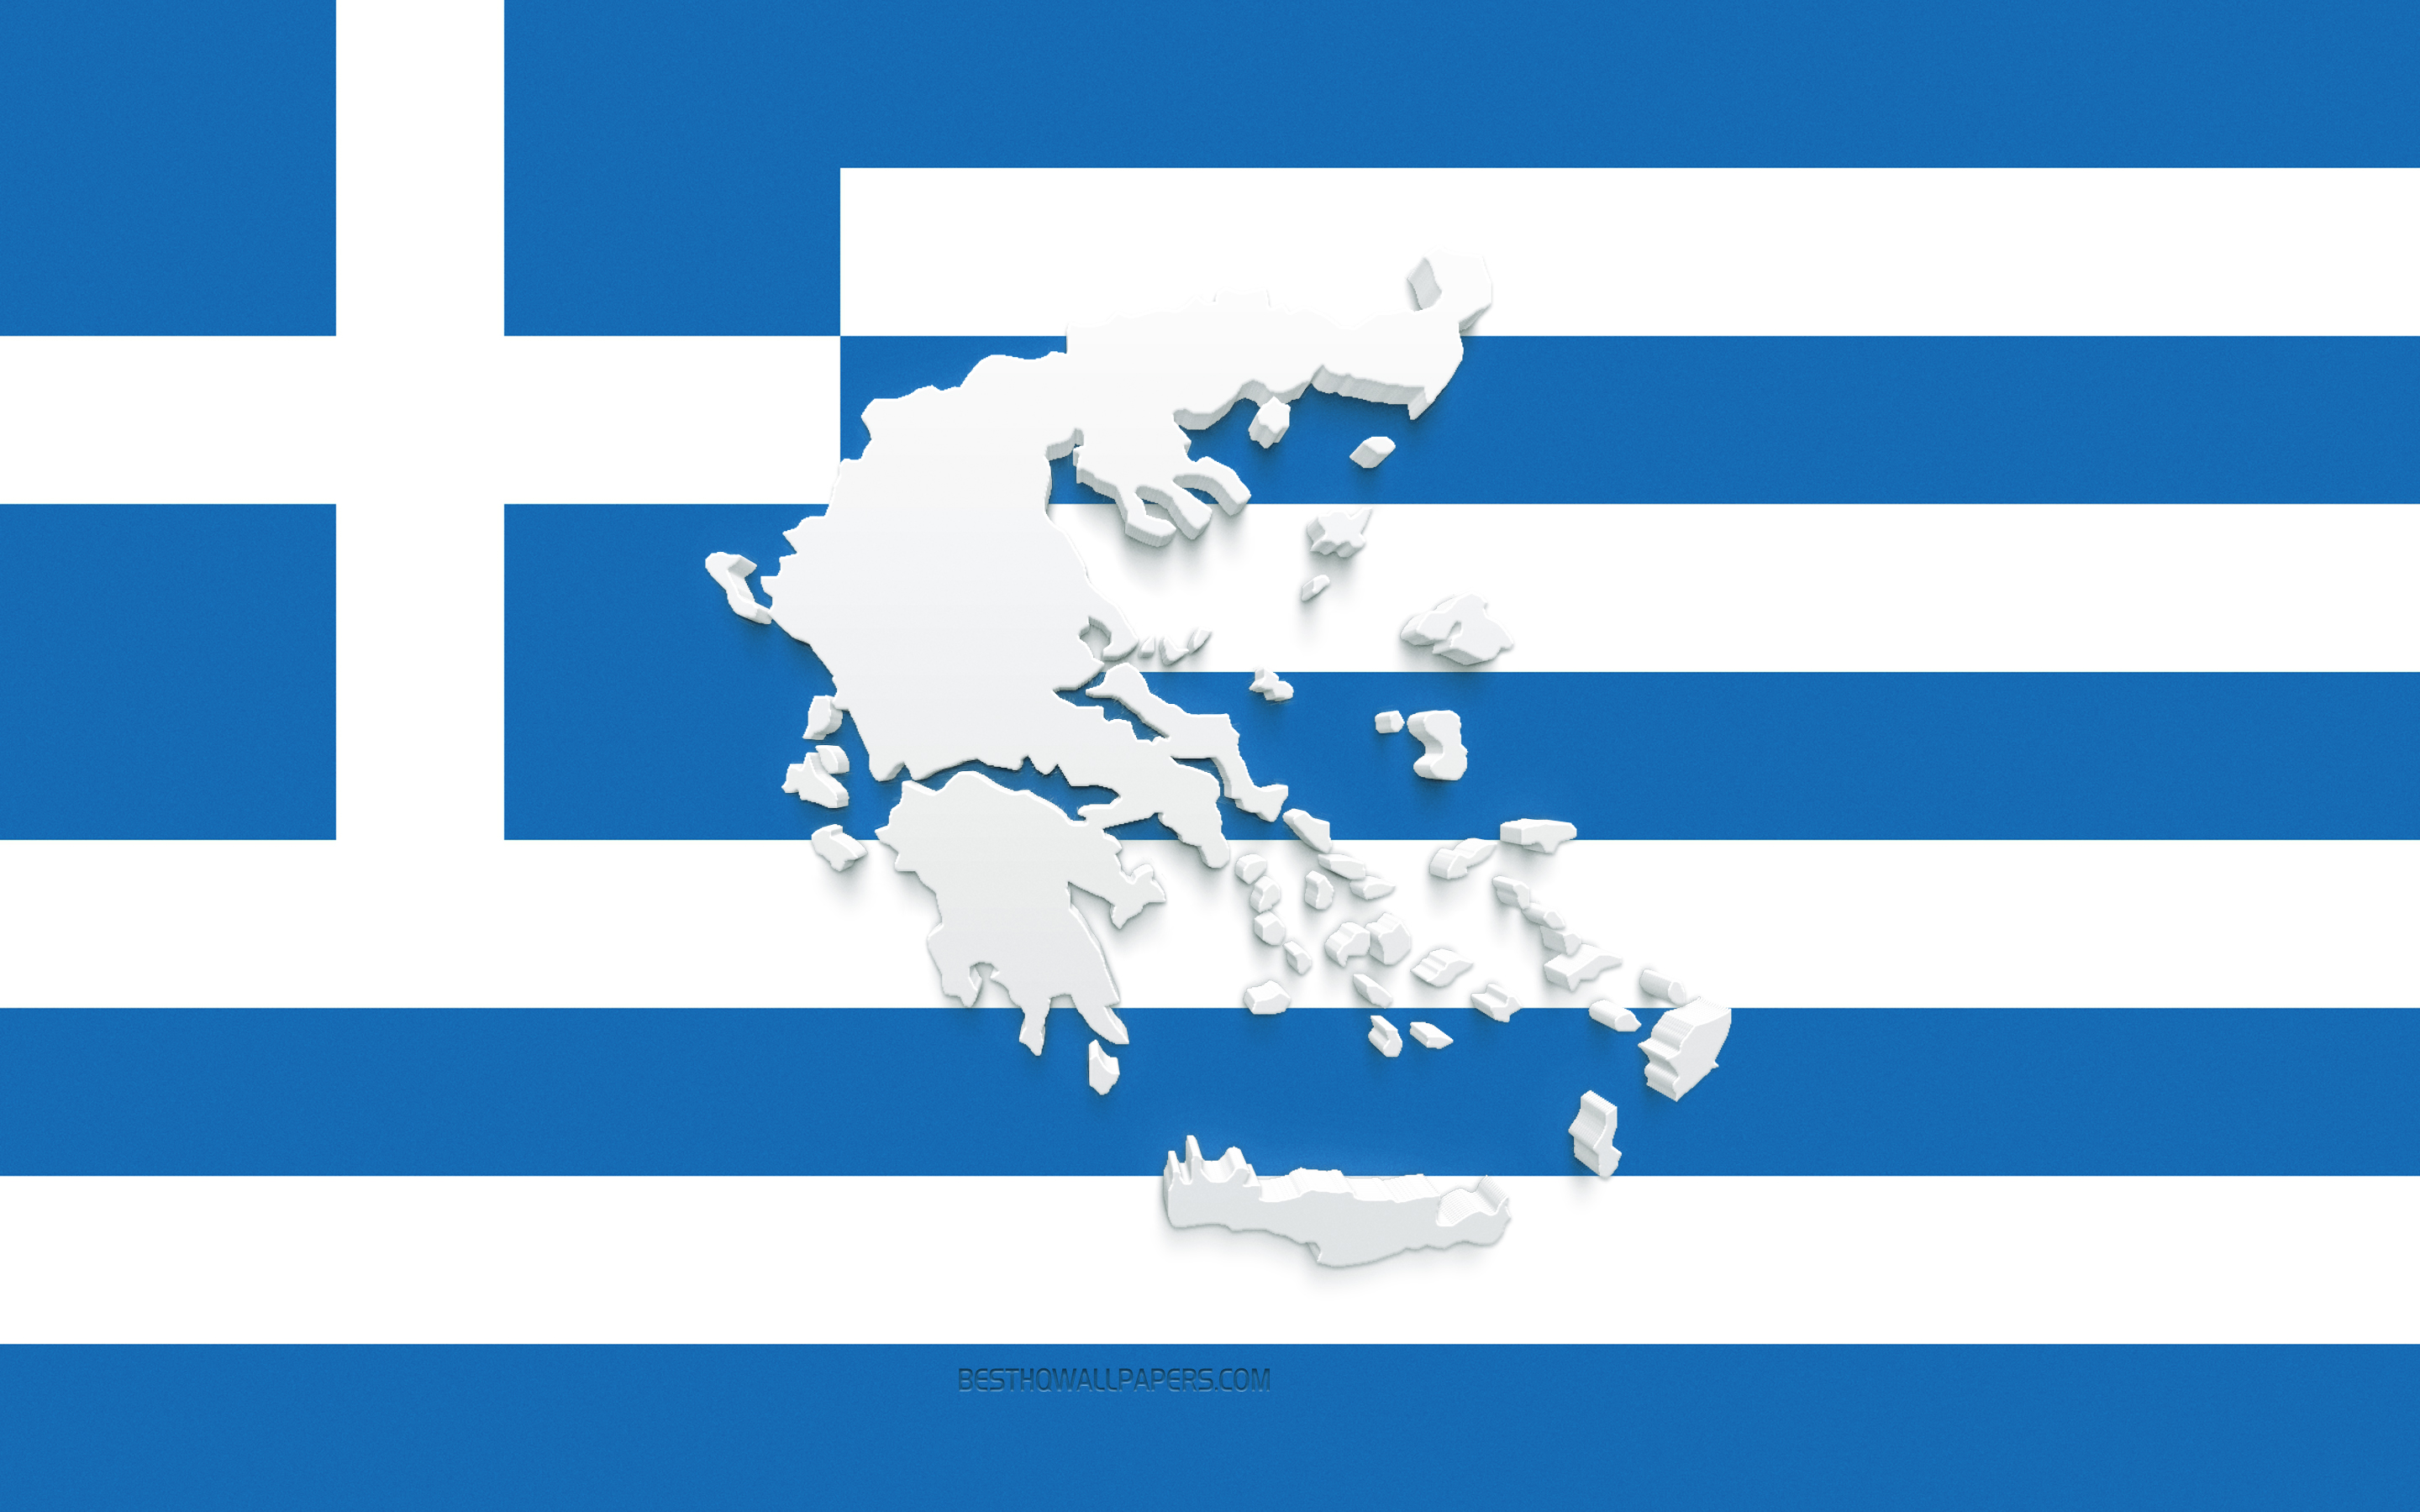 Download wallpaper Greece map silhouette, Flag of Greece, silhouette on the flag, Greece, 3D Greece map silhouette, Greece flag, Greece 3D map for desktop with resolution 2880x1800. High Quality HD picture wallpaper